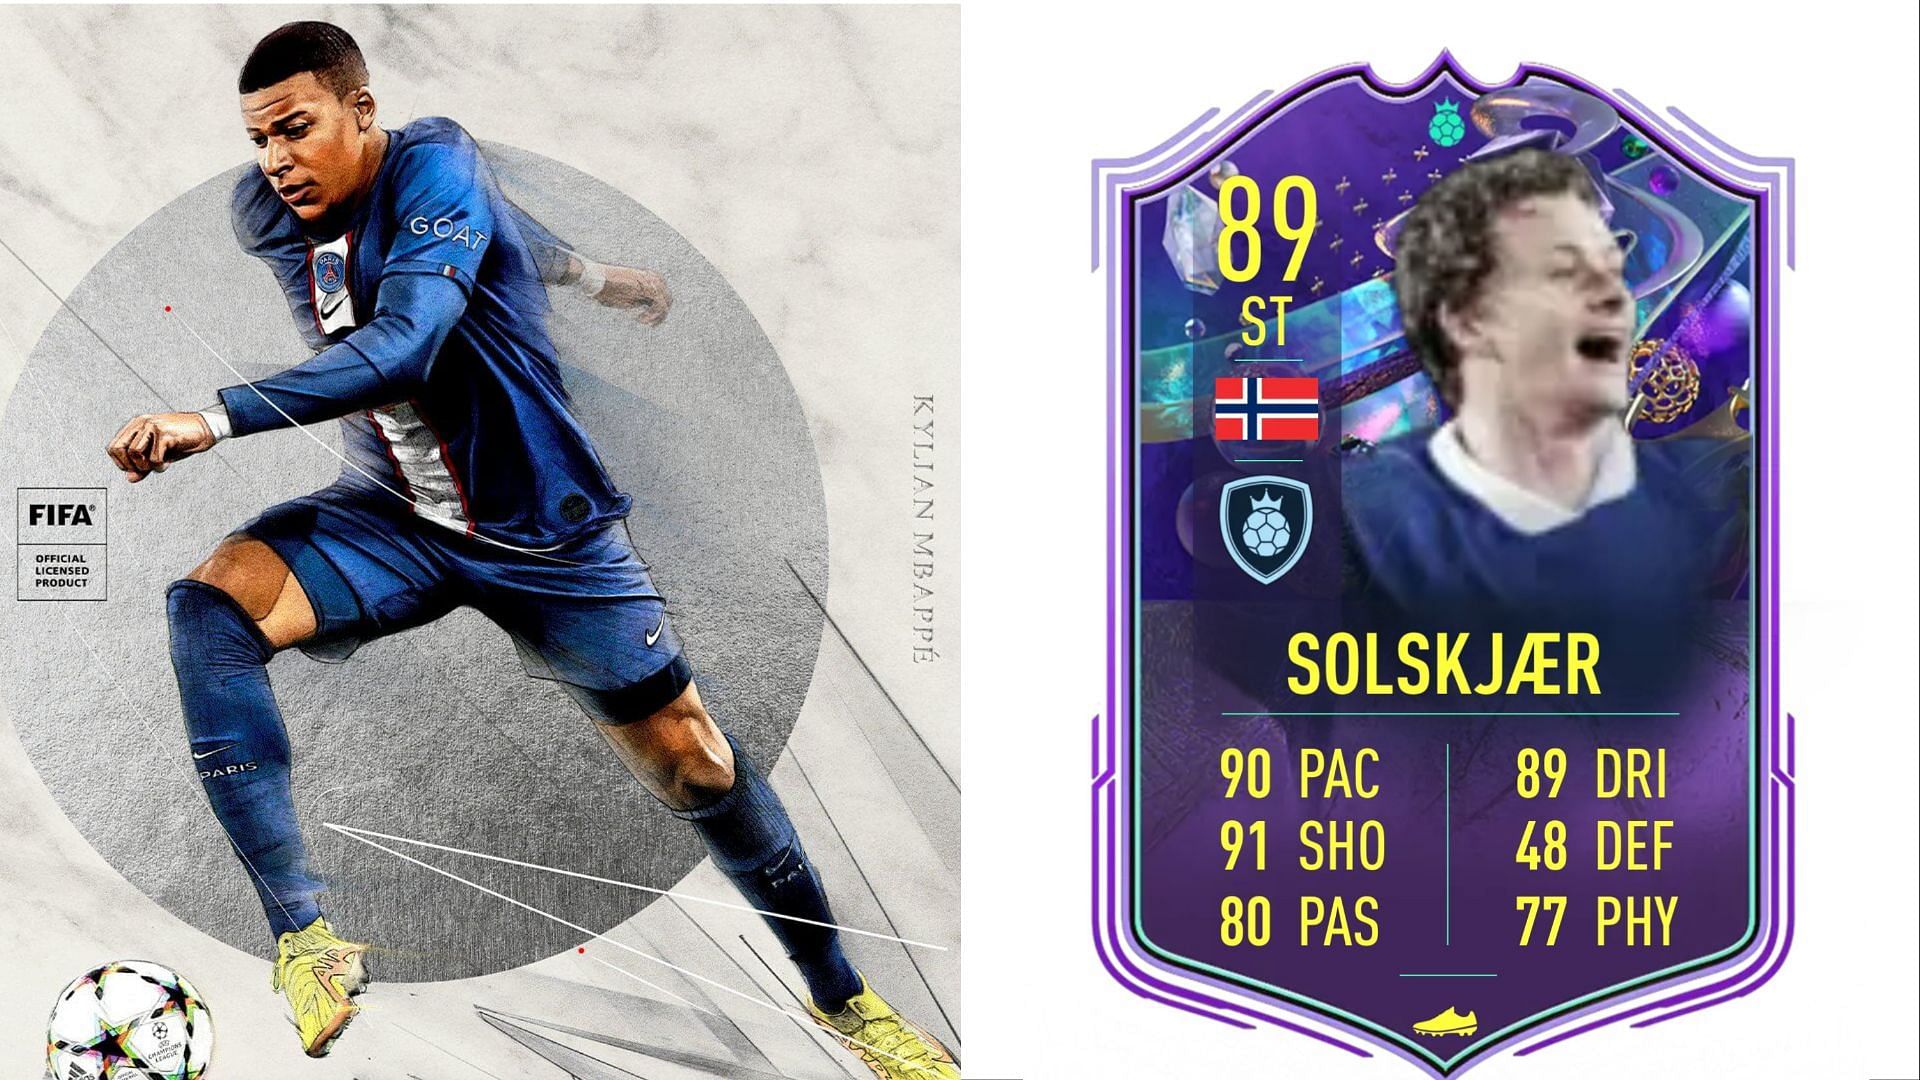 The Ole Gunnar Solksjaer Fantasy FUT card will certainly be an interesting option for FIFA 23 players (Images via EA Sports, Twitter/FIFA 23 Leaks)